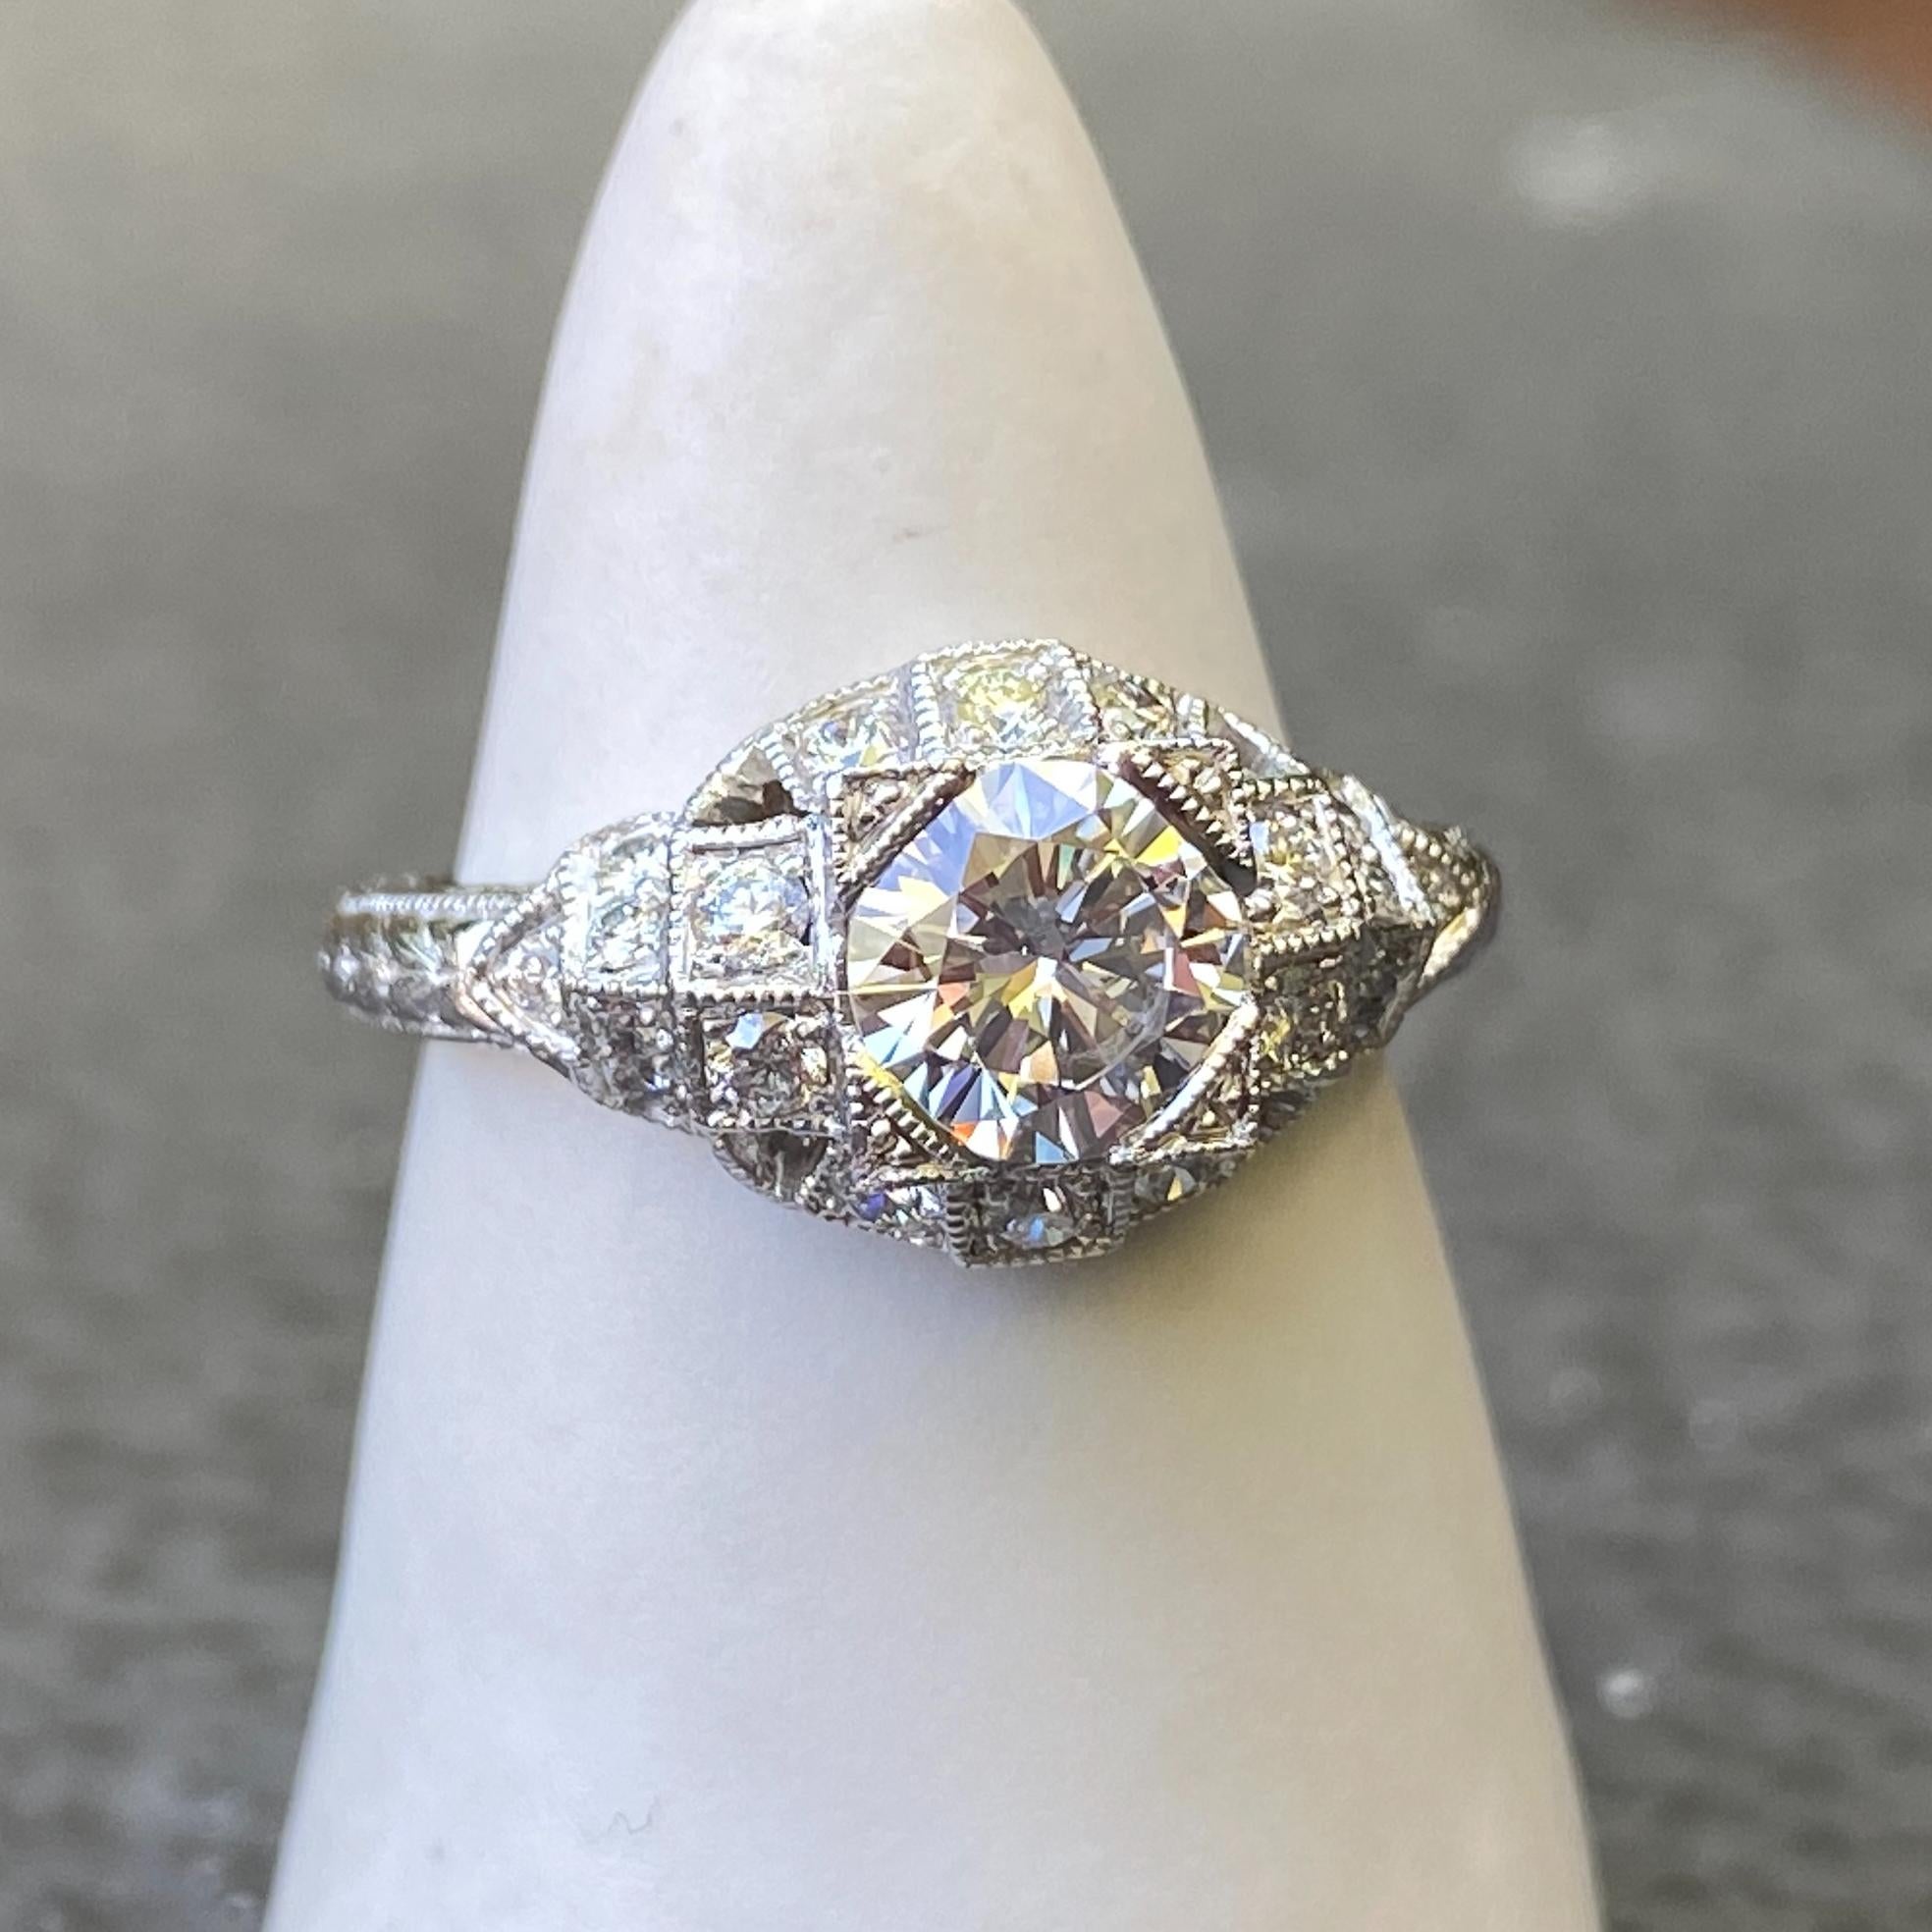 Eytan Brandes designed this ring using various elements he likes from Edwardian engagement rings, such as the carinated shank, the coin-edged pavé setting plates, and the elevated, almost bombé face.  This is the second time he has used this